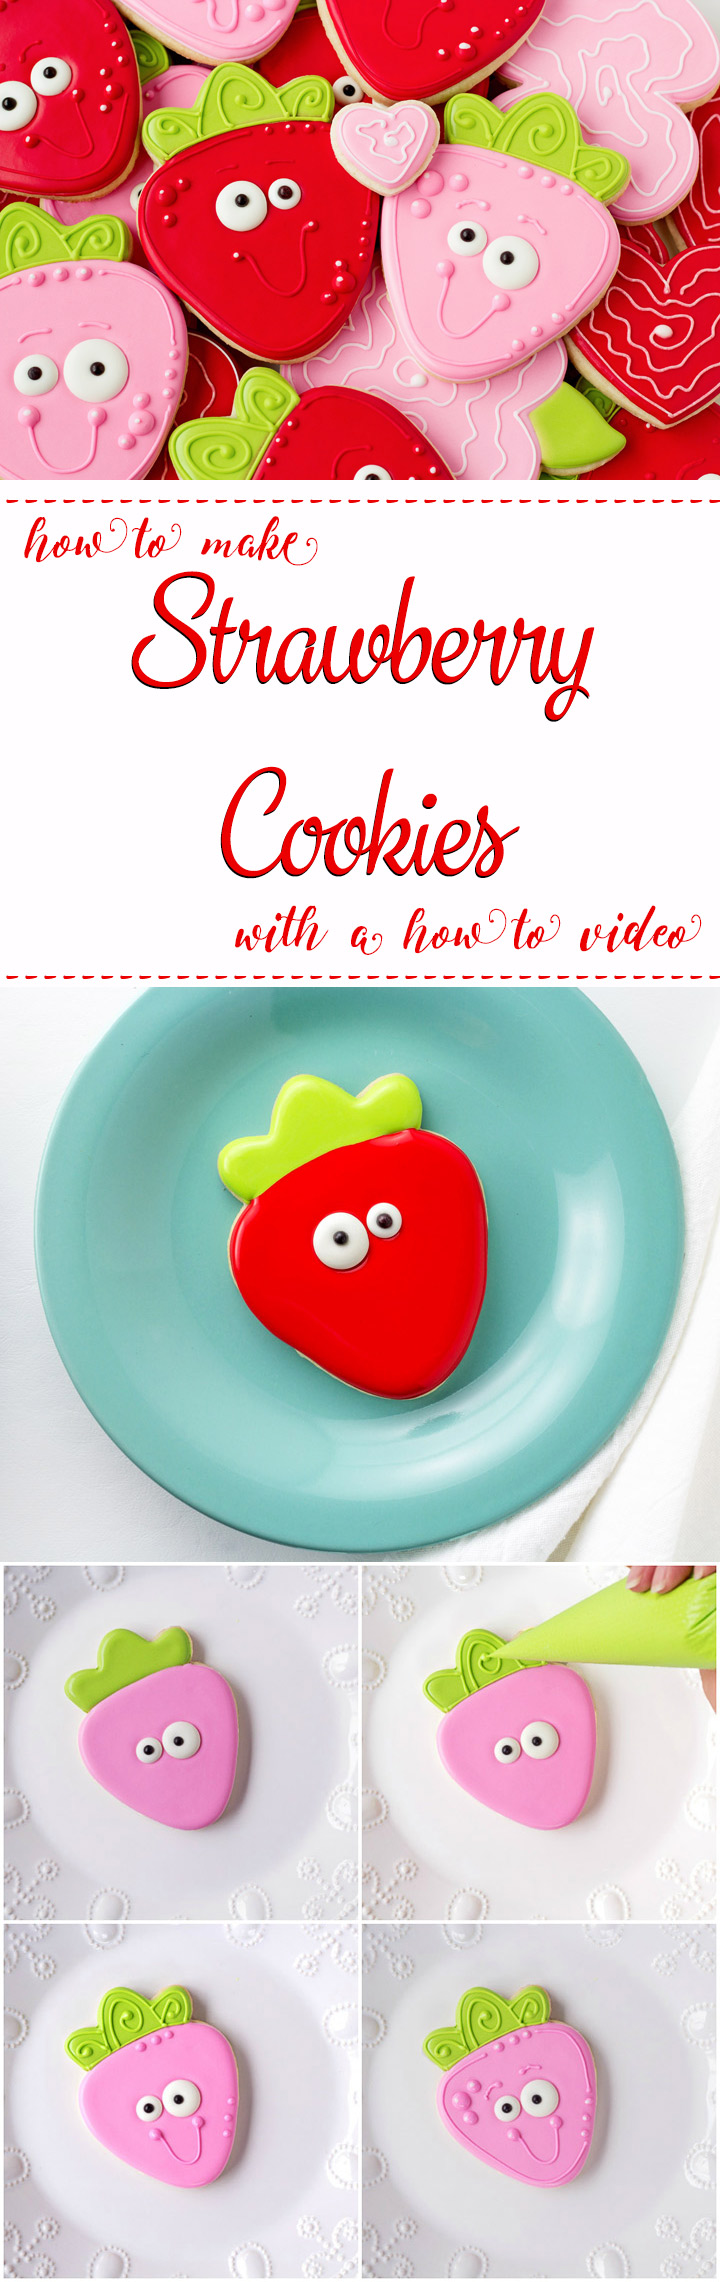 How to Make Simple Cute Strawberry Cookies with a How to Video | The Bearfoot Baker